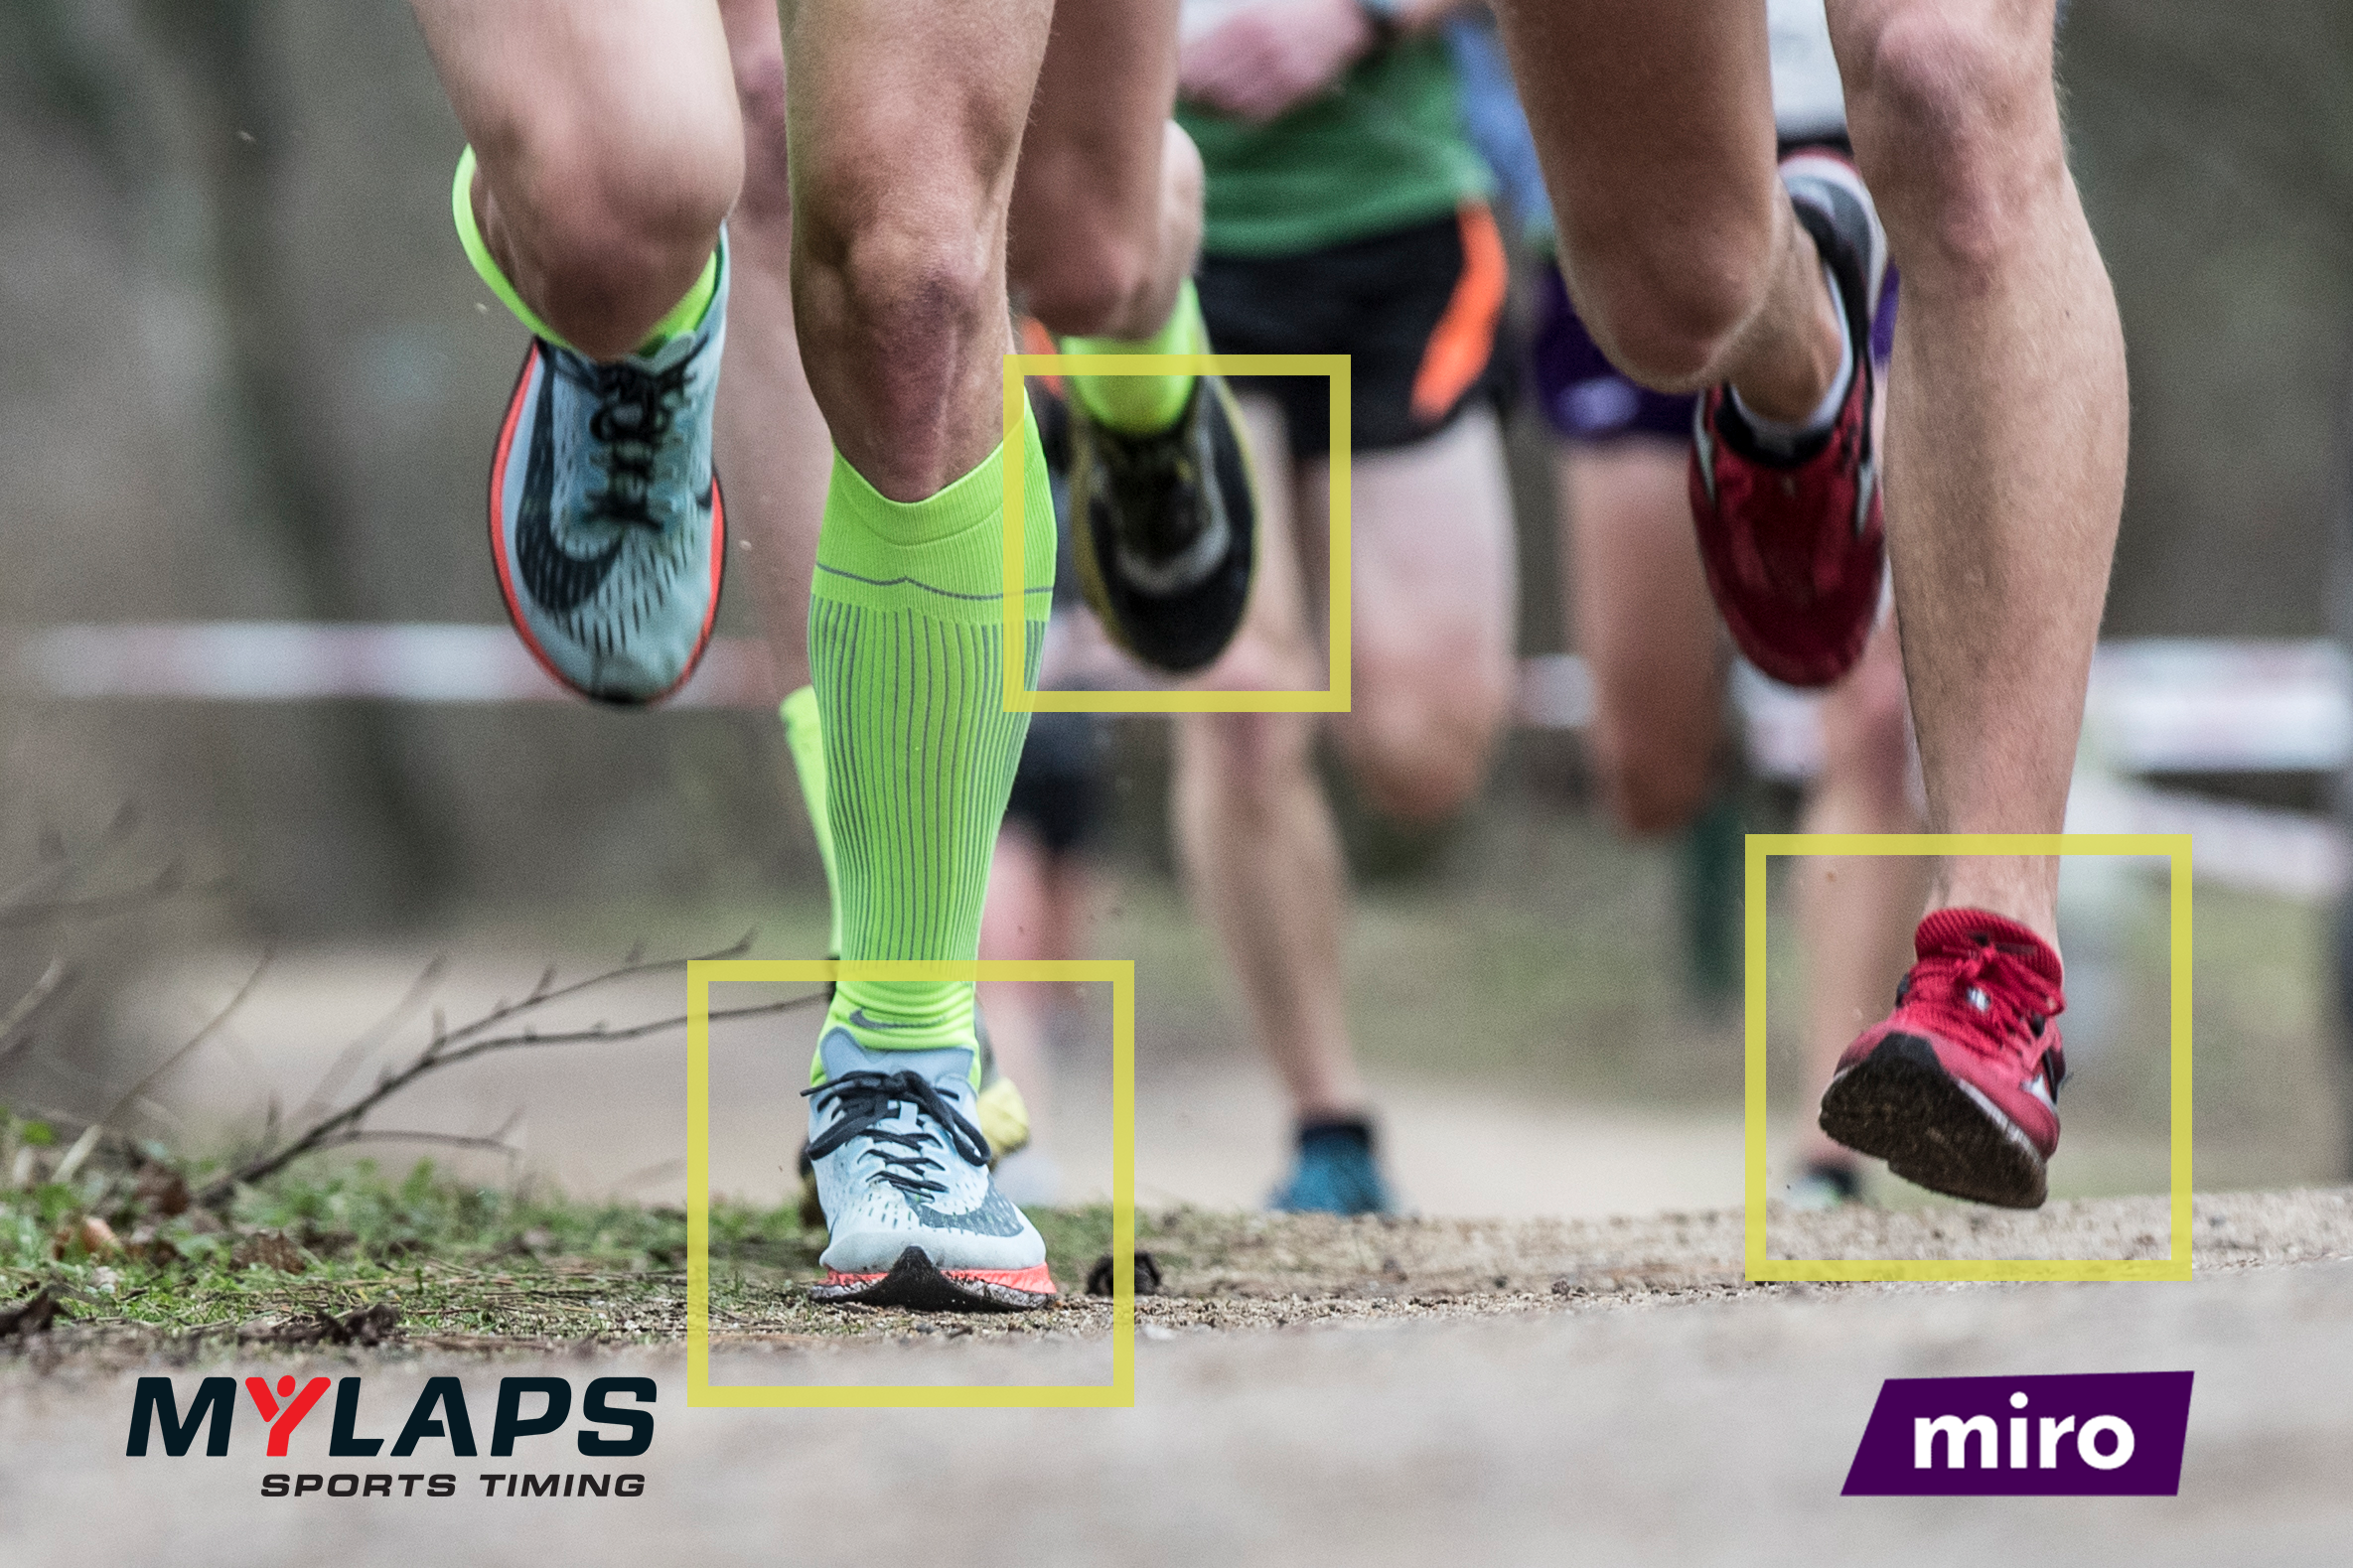 MYLAPS and MIRO AI partner up to offer new AI services